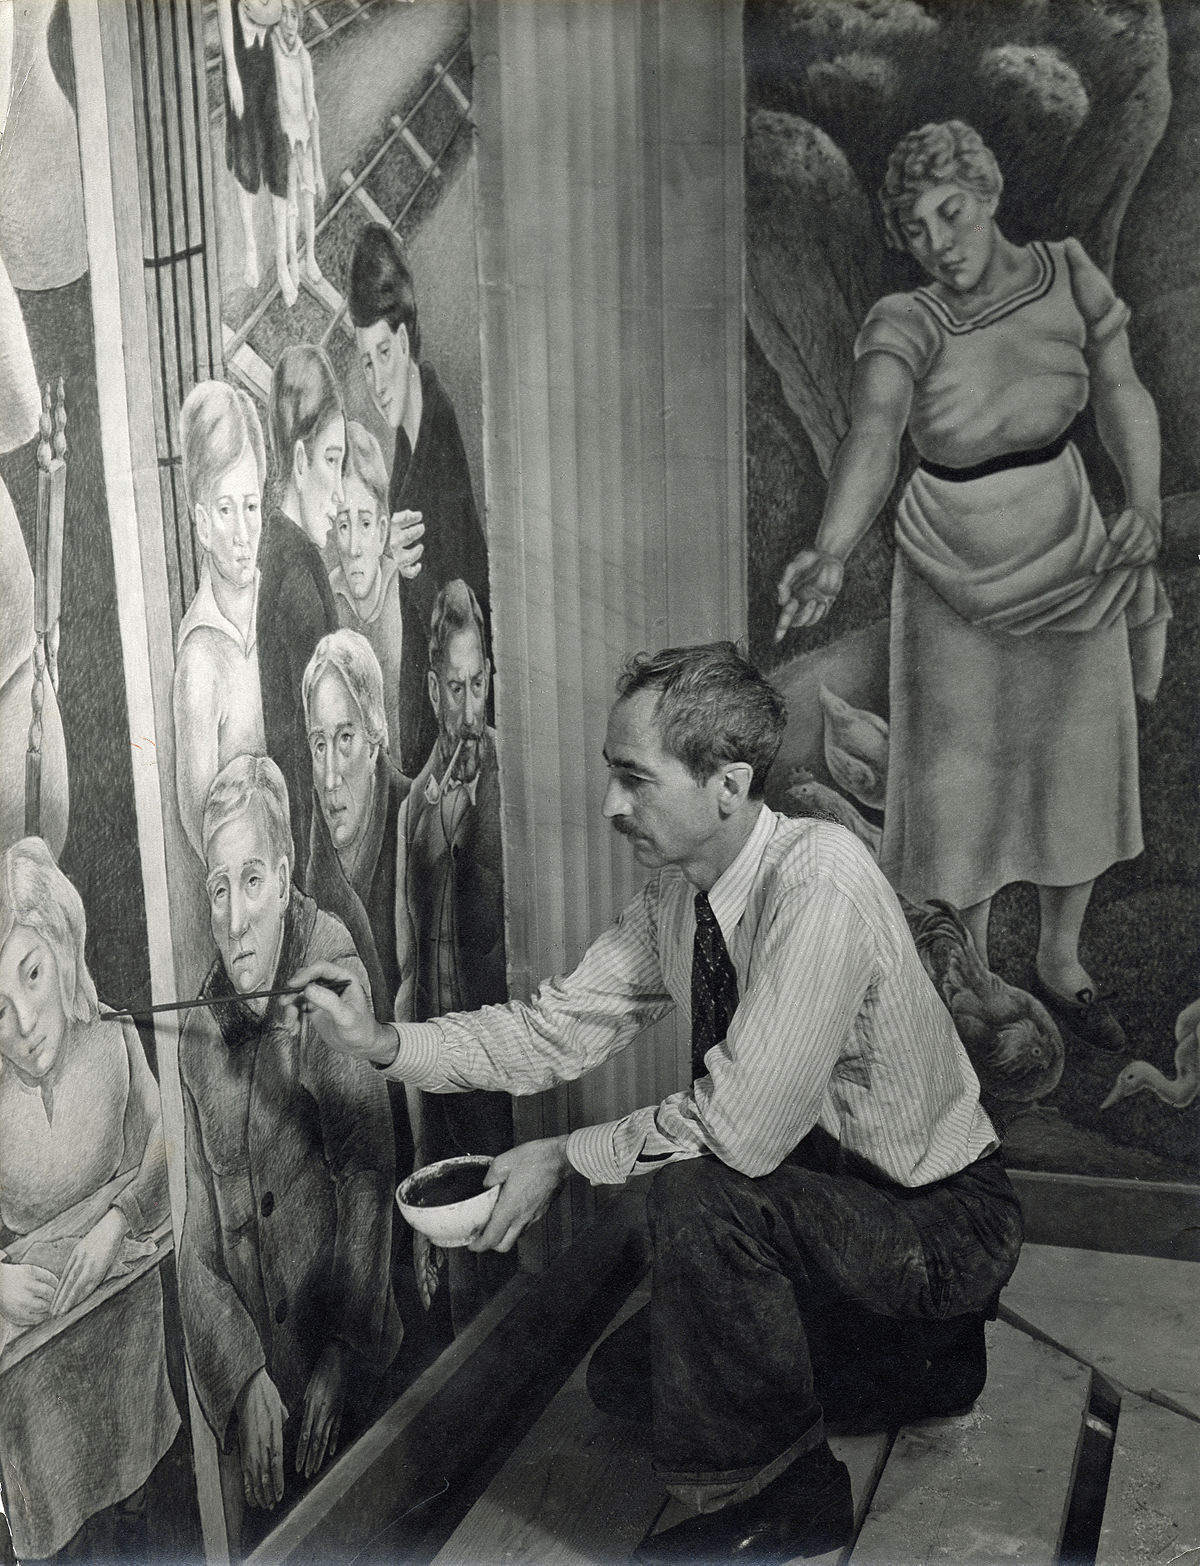 Photograph of George Biddle at Work, 1930s